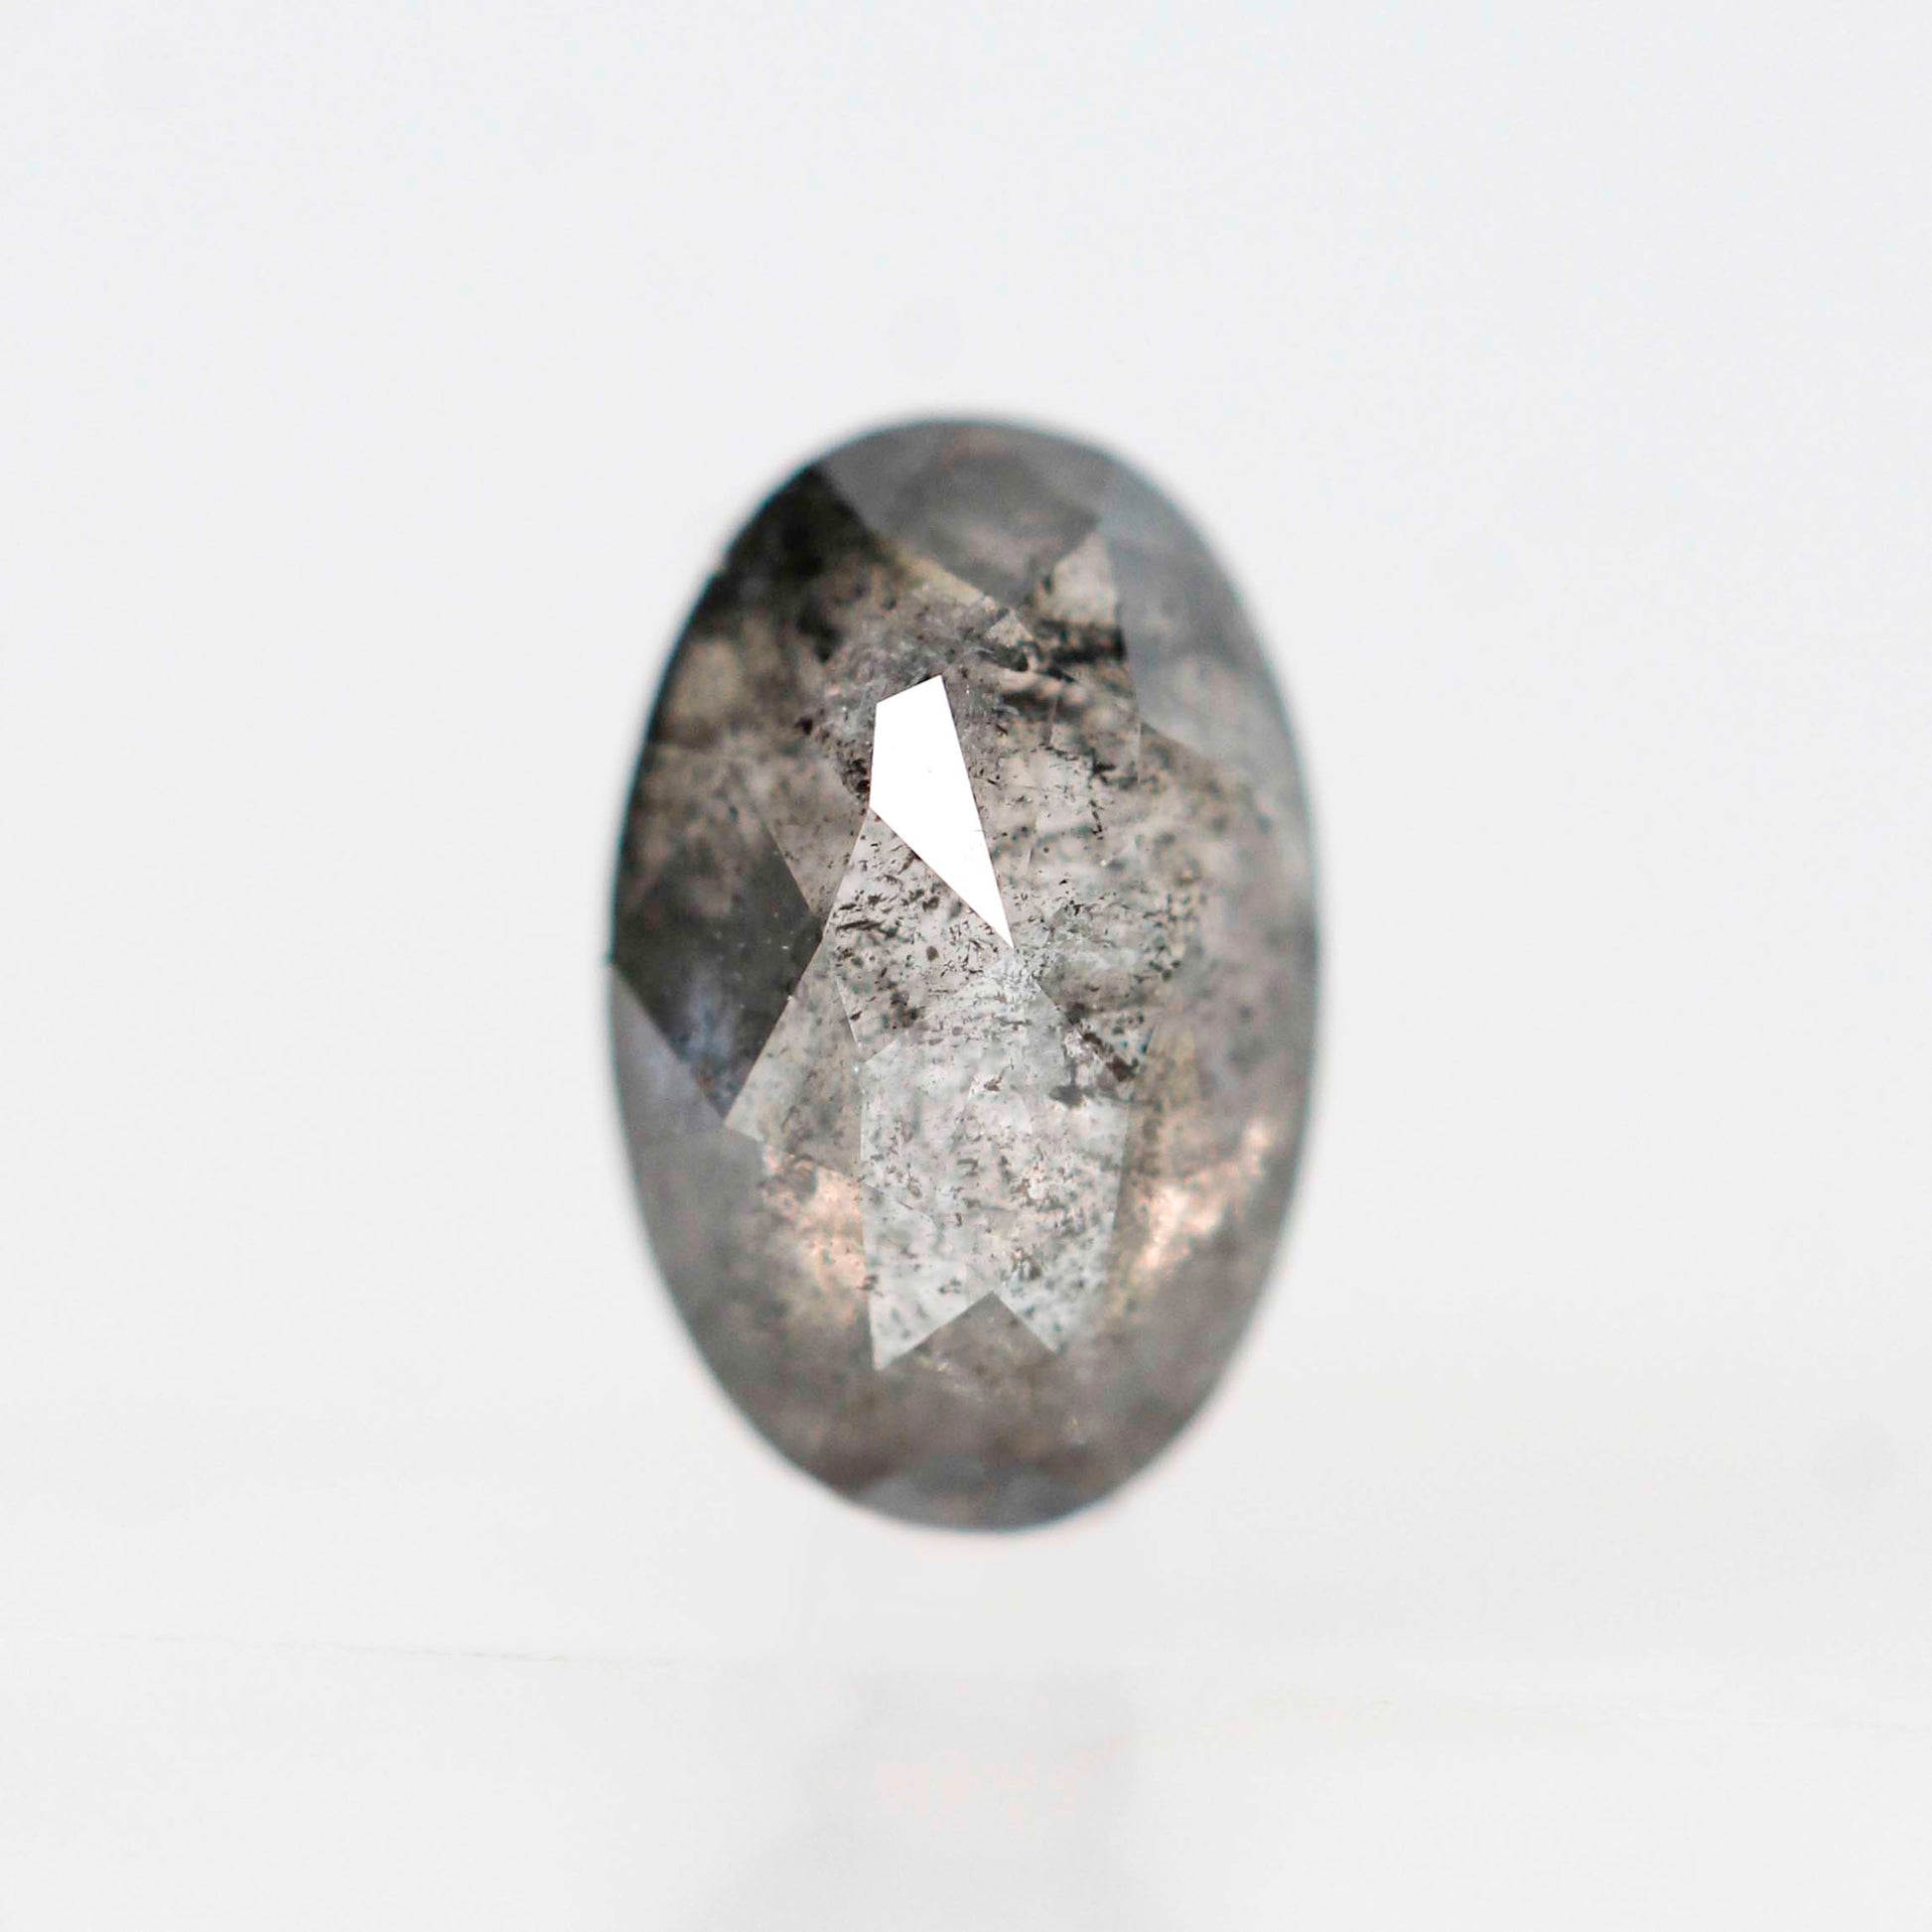 0.72 Carat Dark Gray Celestial Oval Diamond for Custom Work - Inventory Code DSO072 - Midwinter Co. Alternative Bridal Rings and Modern Fine Jewelry